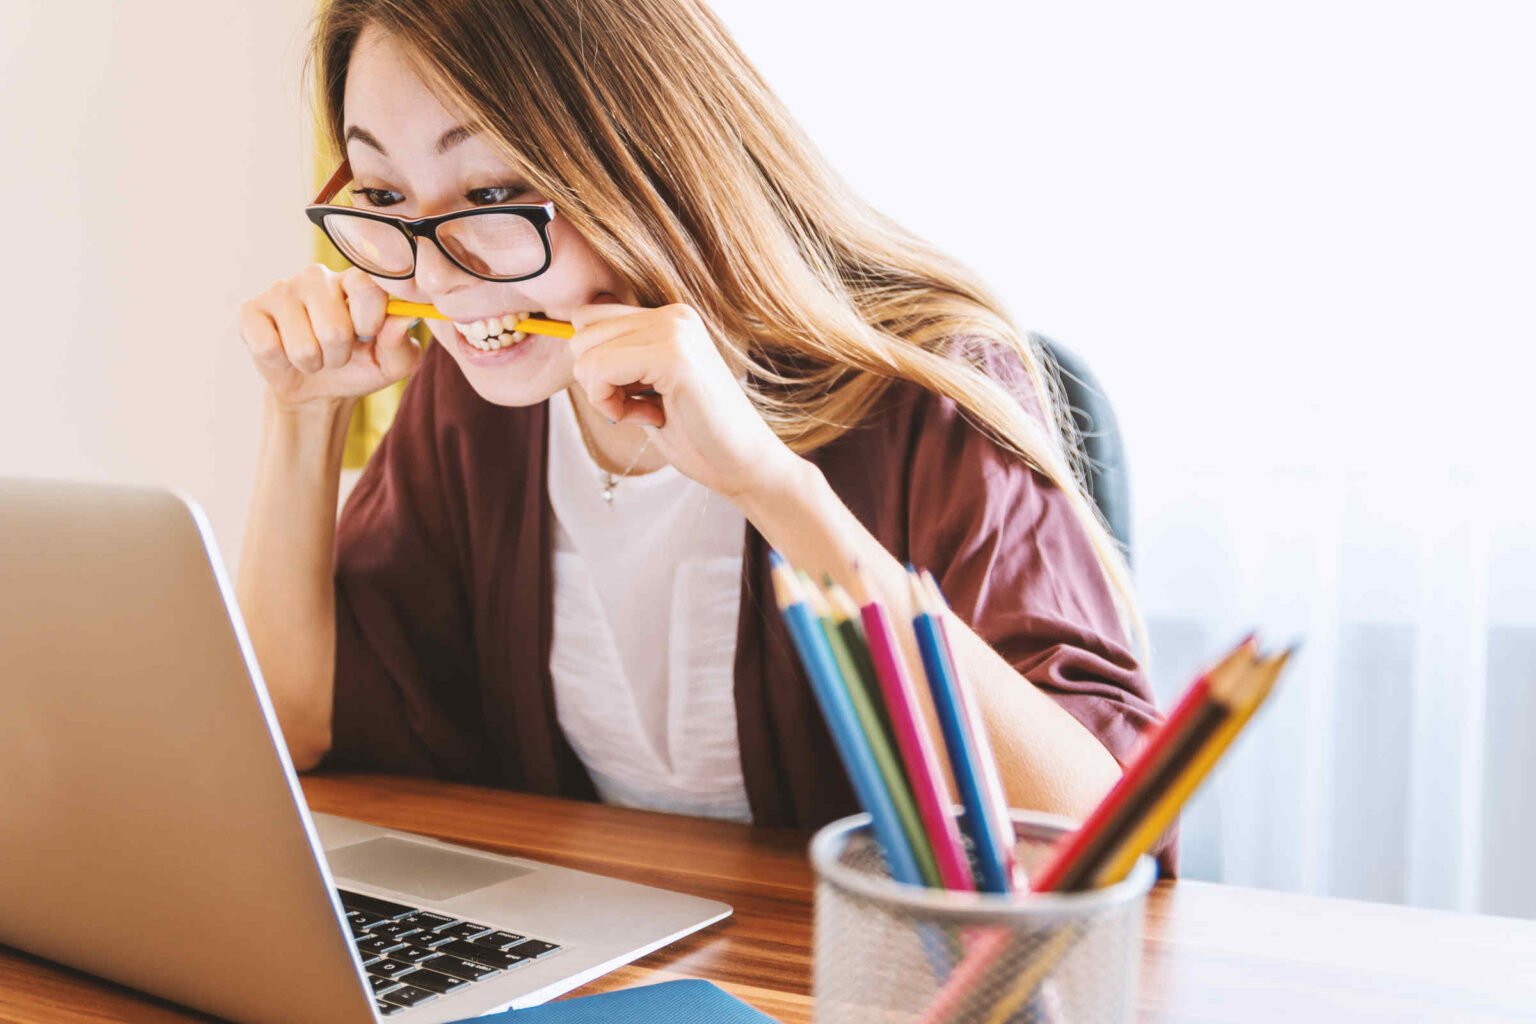 From getting distracted or just being bored to tears, use these tips to help you overcome online learning challenges and bring fun back to the classroom.